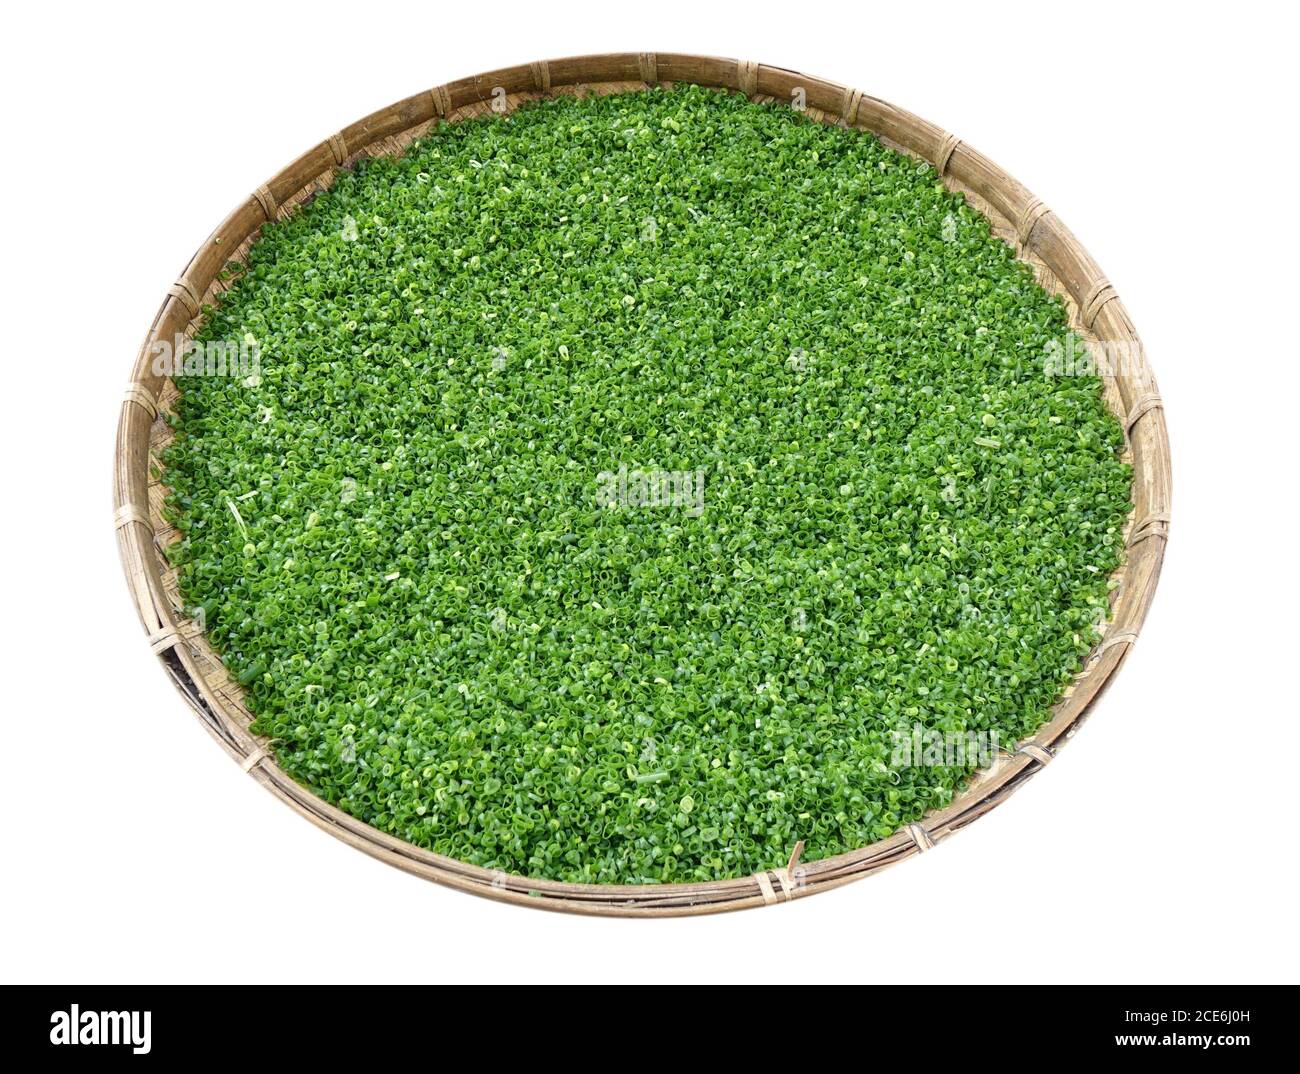 Finely chopped shallots or chives dry in the sun Stock Photo